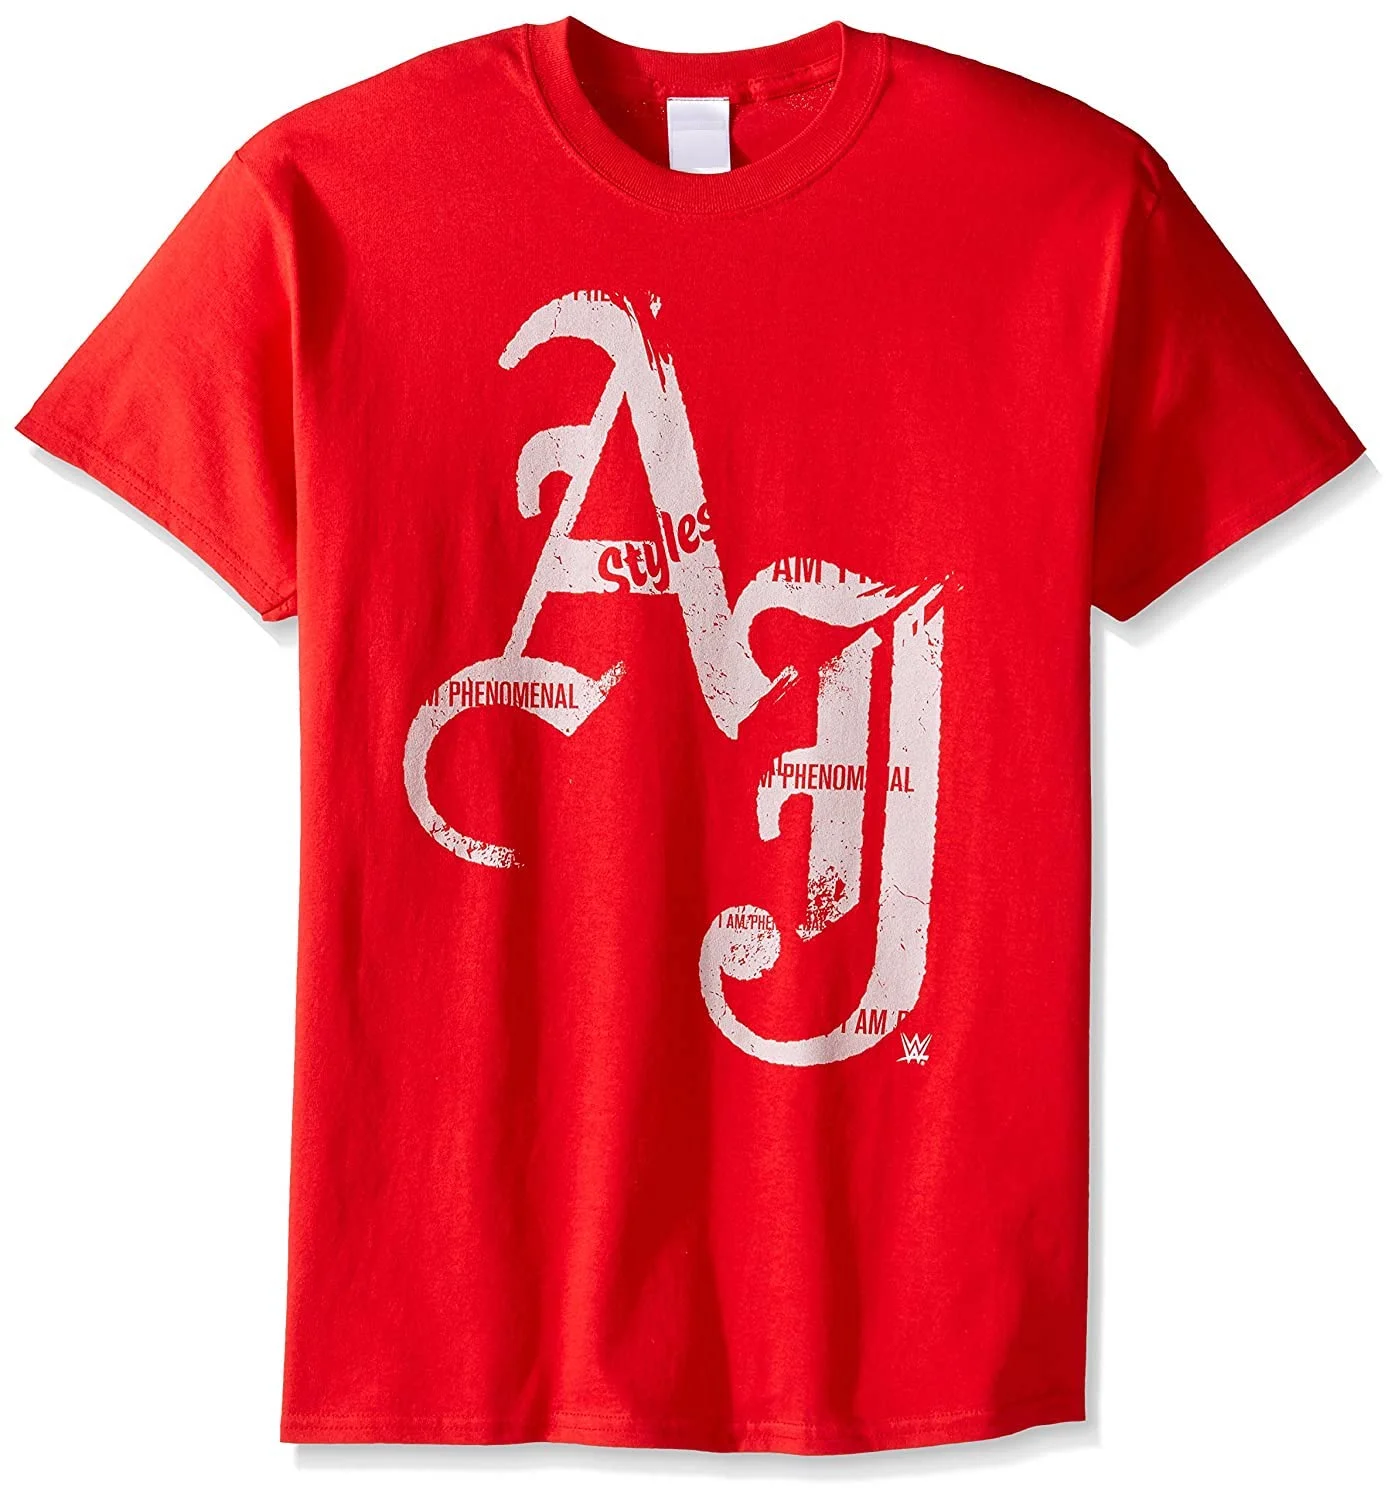 Red Dropped Shoulder Customizable T-shirts Manufacturer in Bolivia